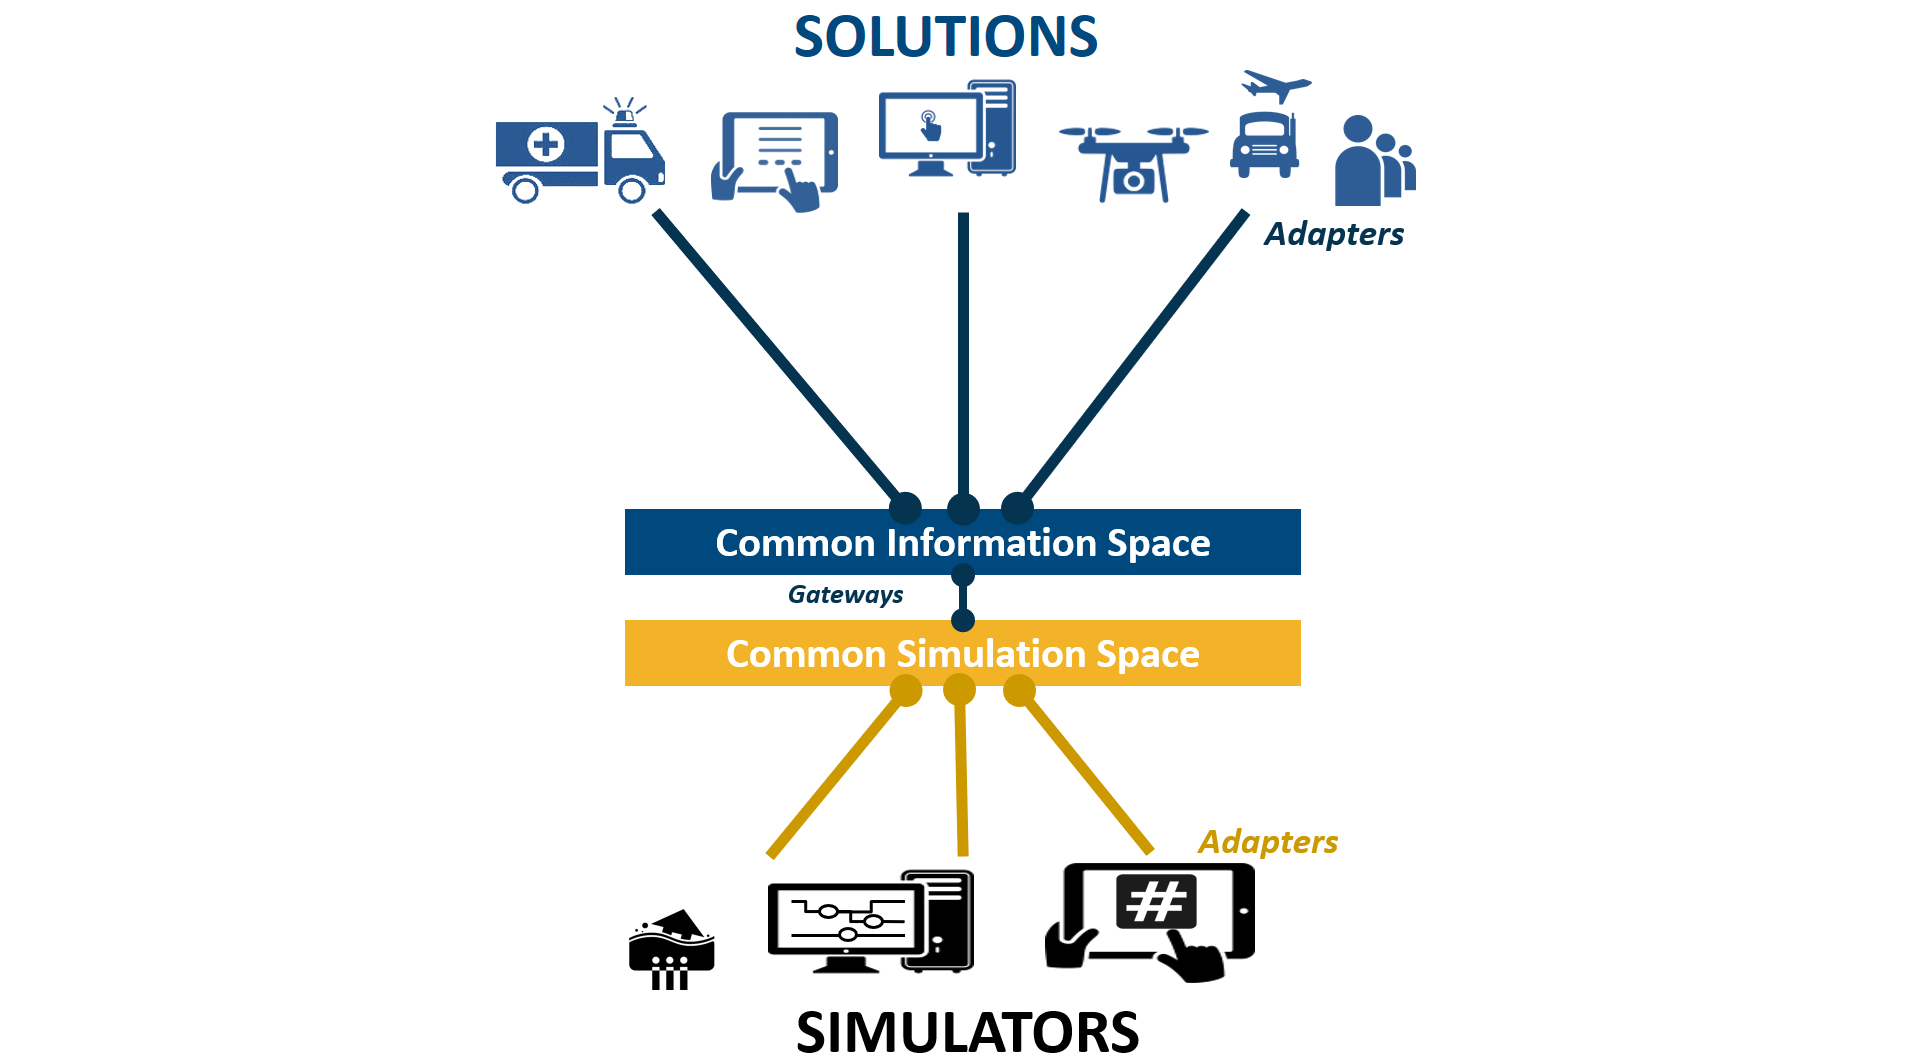 The Common Information and Simulation Space allow the exchange of well-structured, informative messages